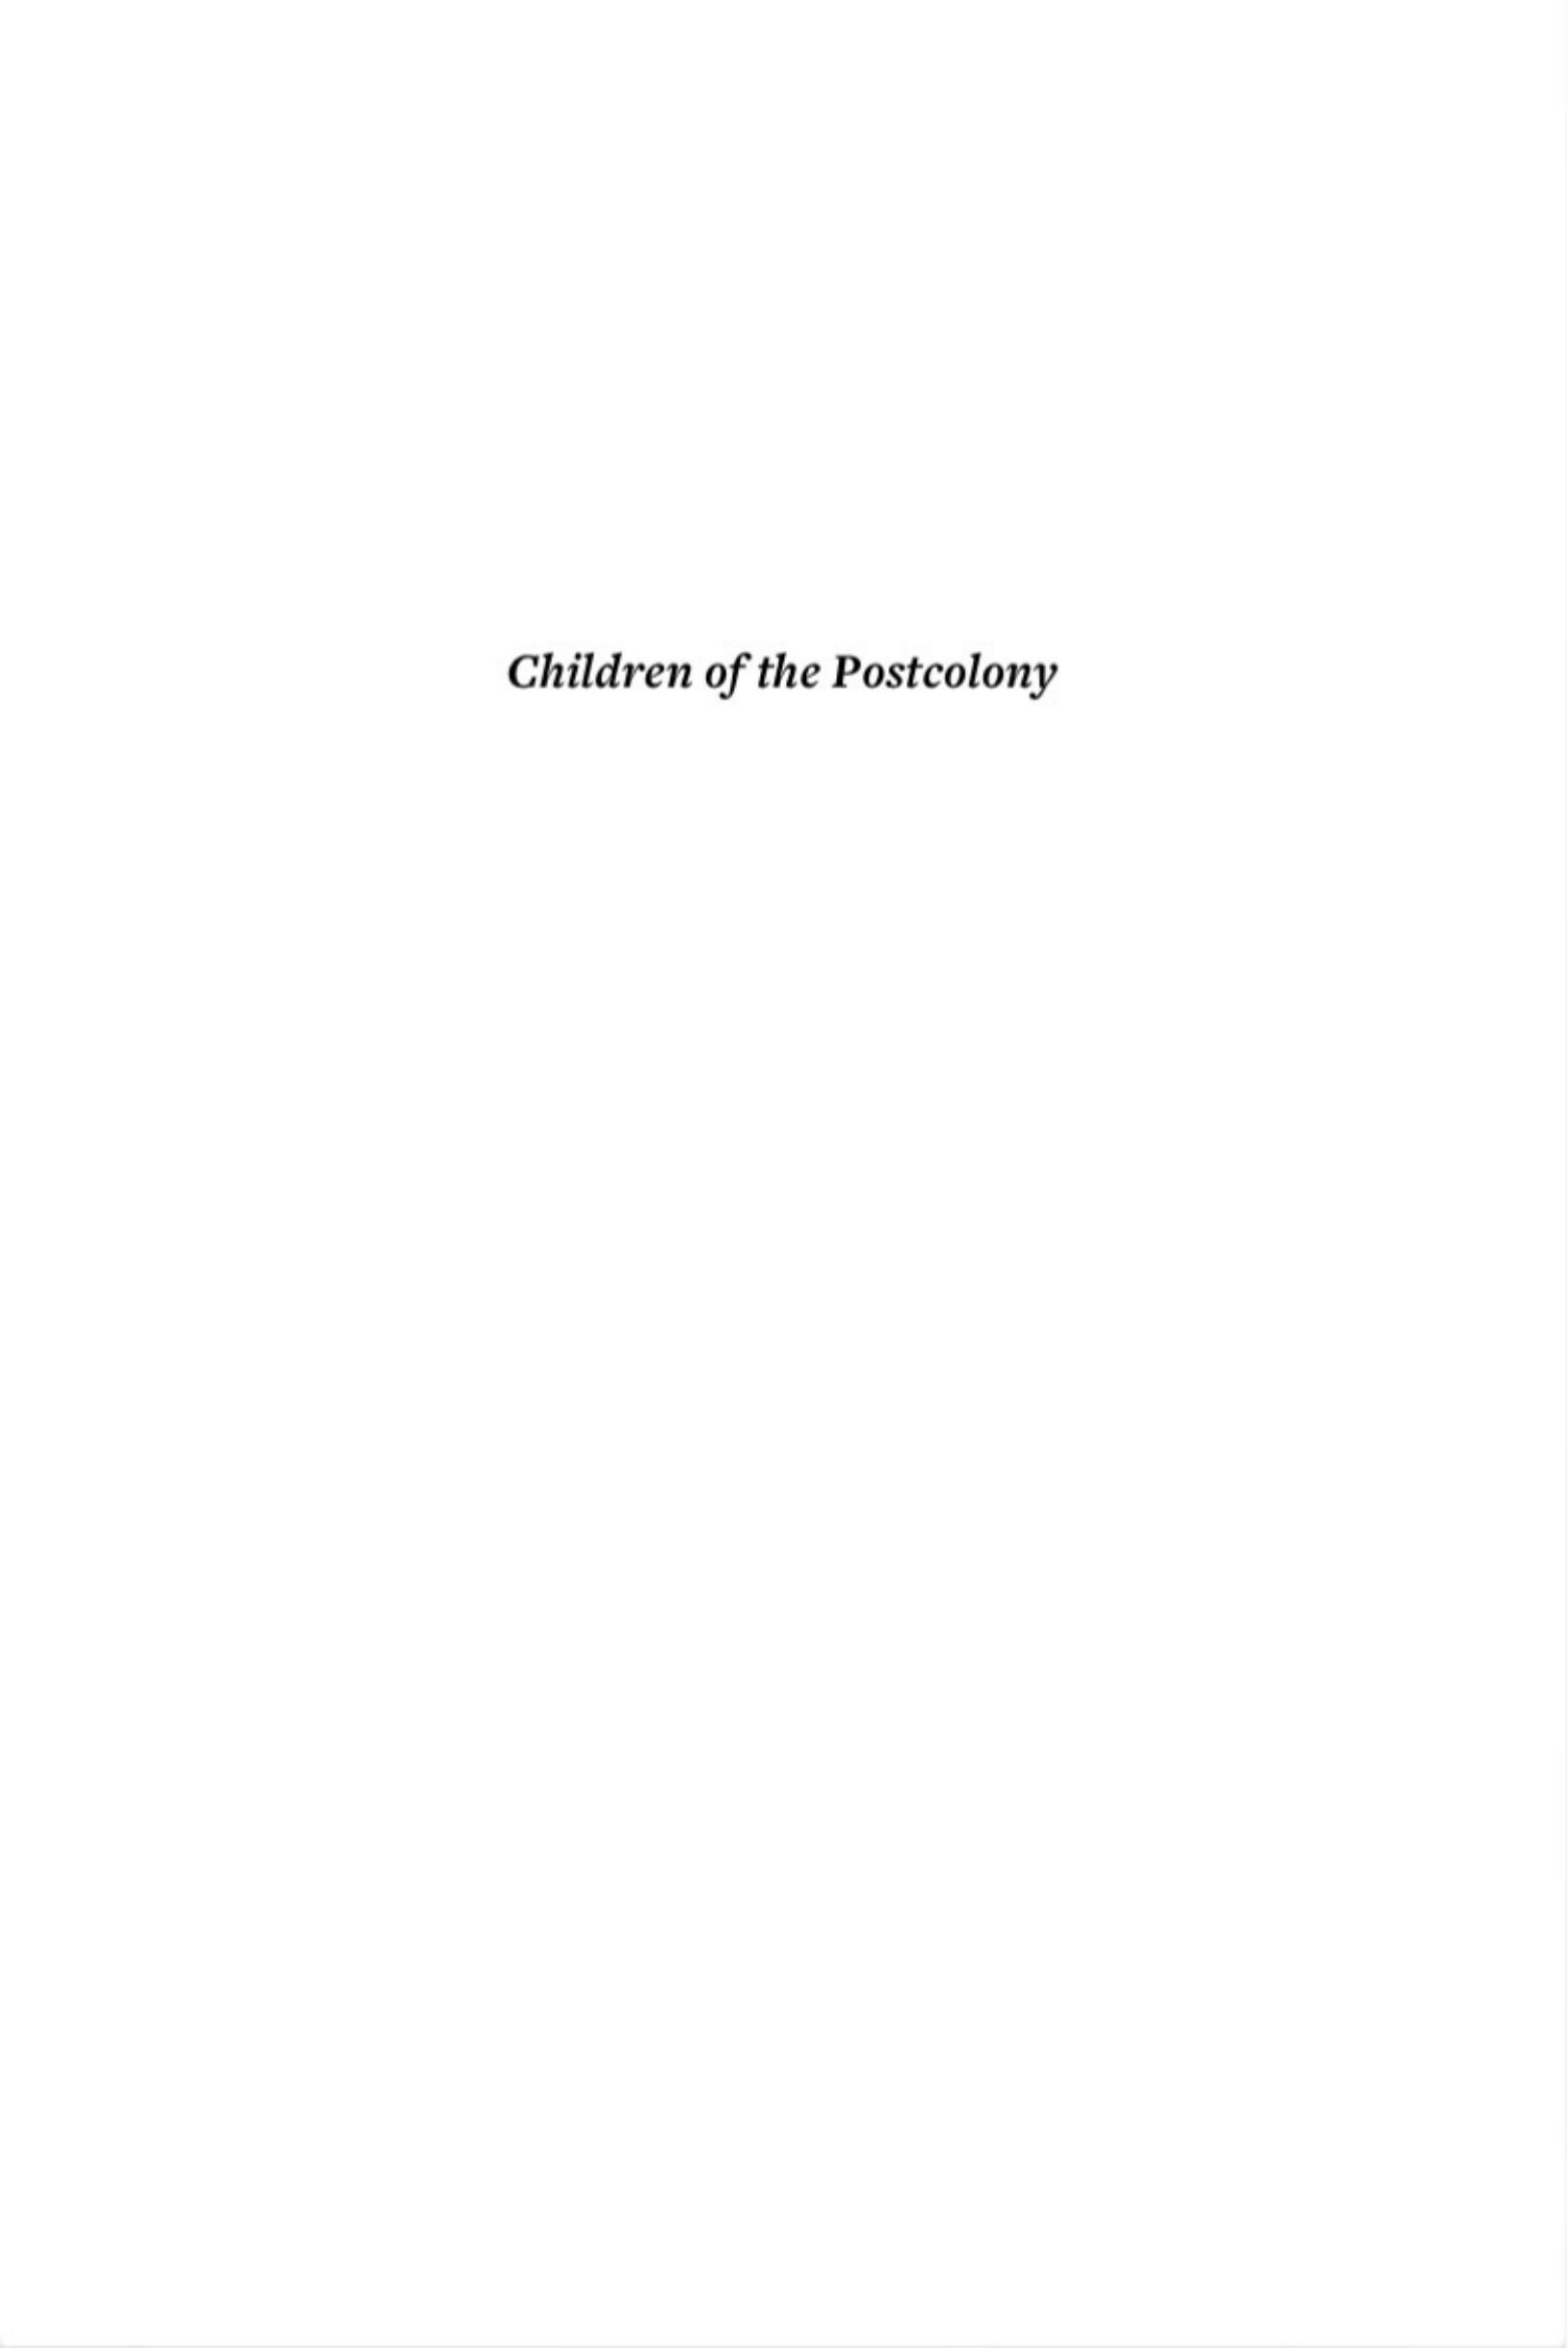 Children of the Postcolony: Filipino Intellectuals and Decolonization, 1946-1972 by Charlie Samuya Veric